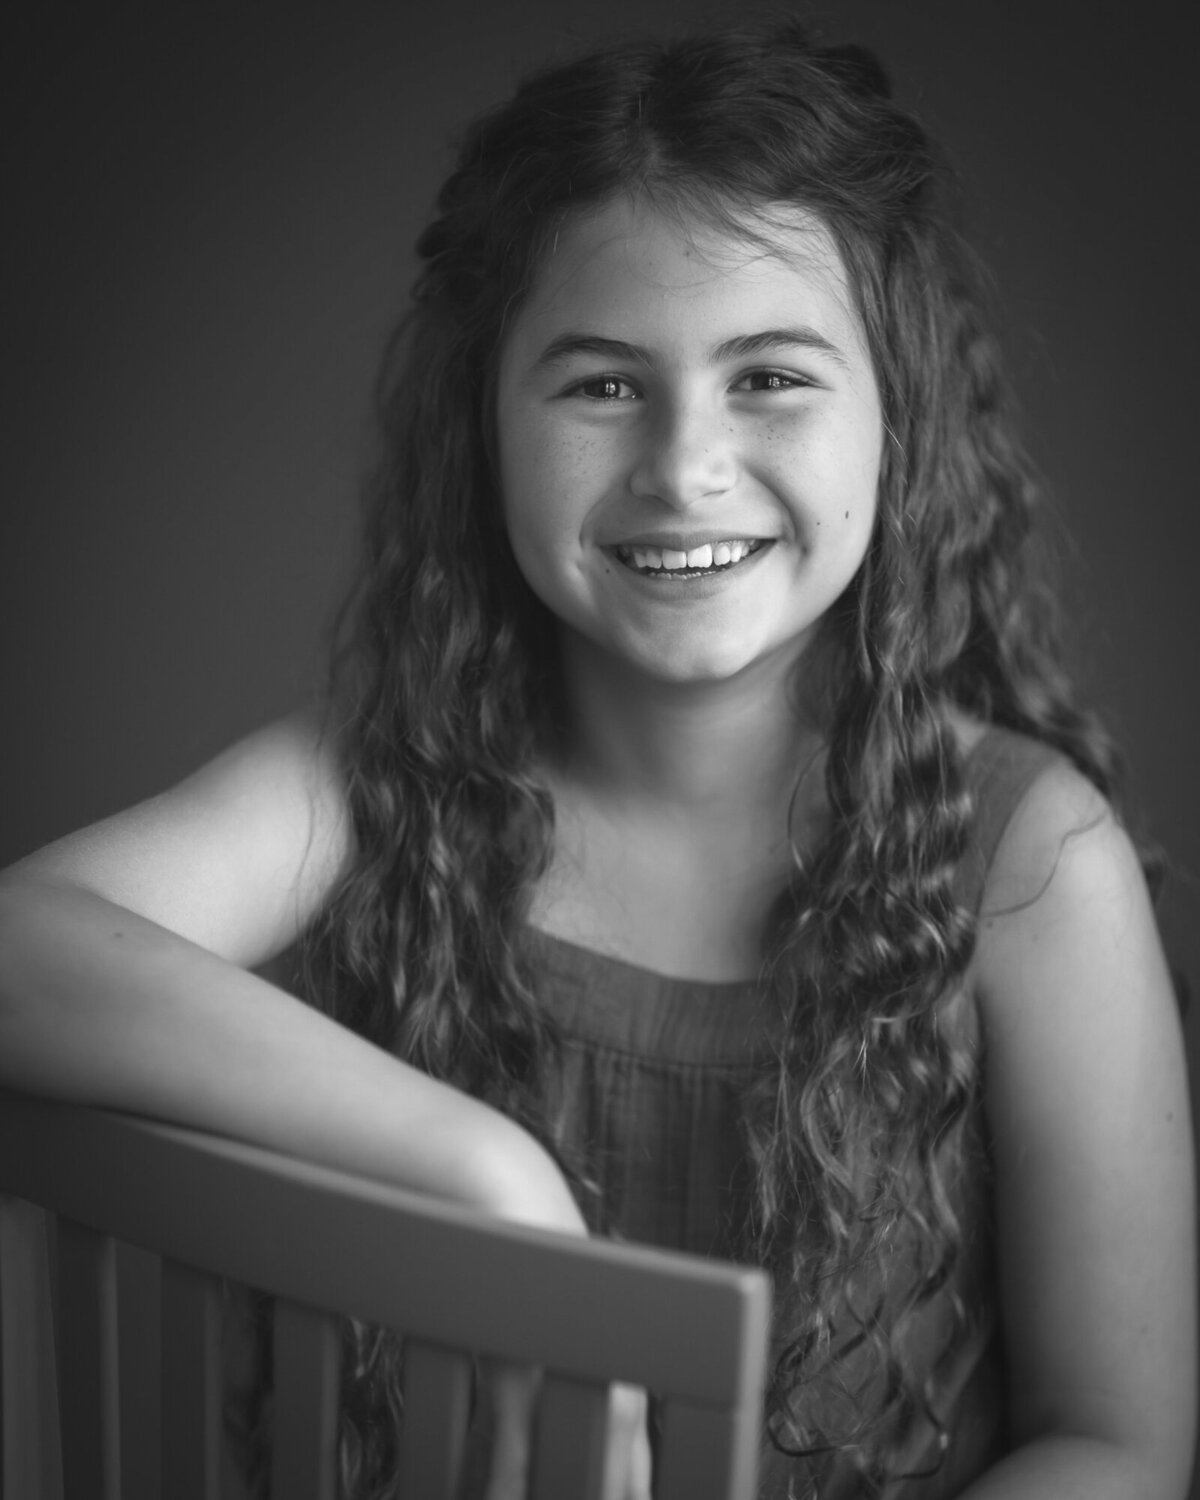 black and white studio portrait  of a ten year old gril very happy and smiling